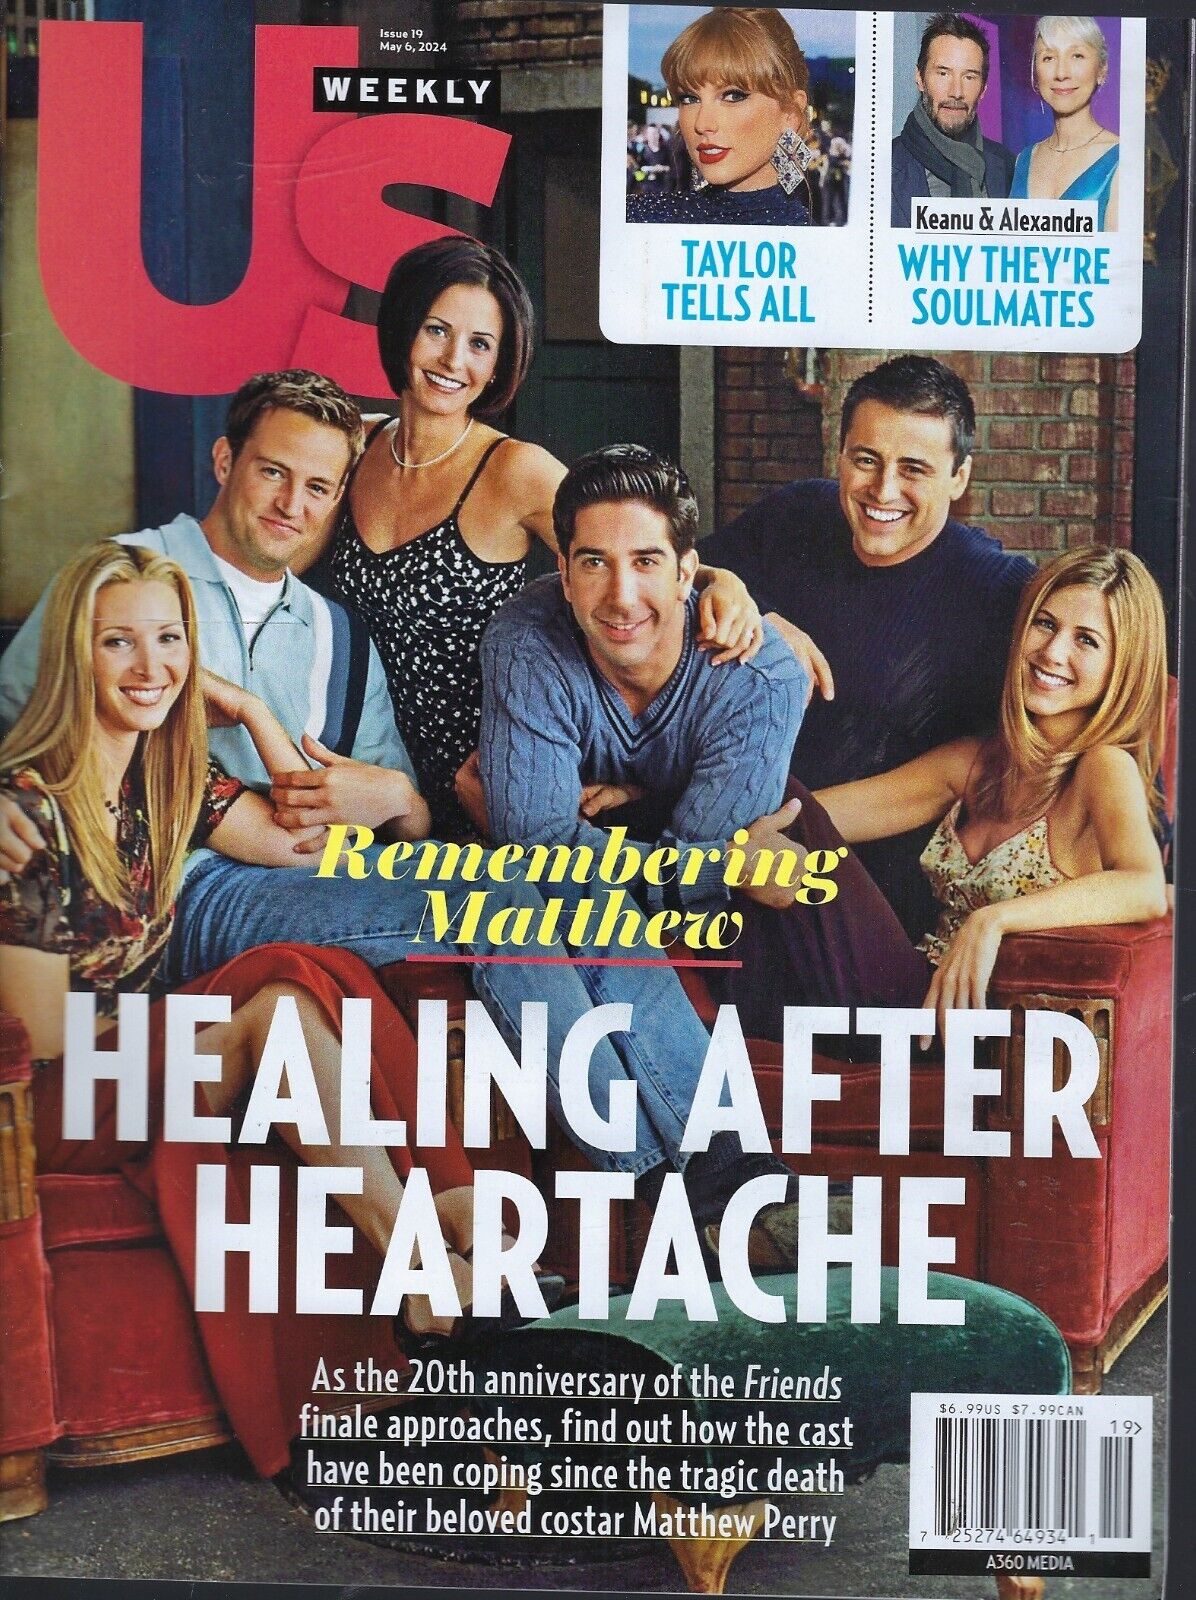 US Weekly Magazine May 6th 2024   Healing after Heartache